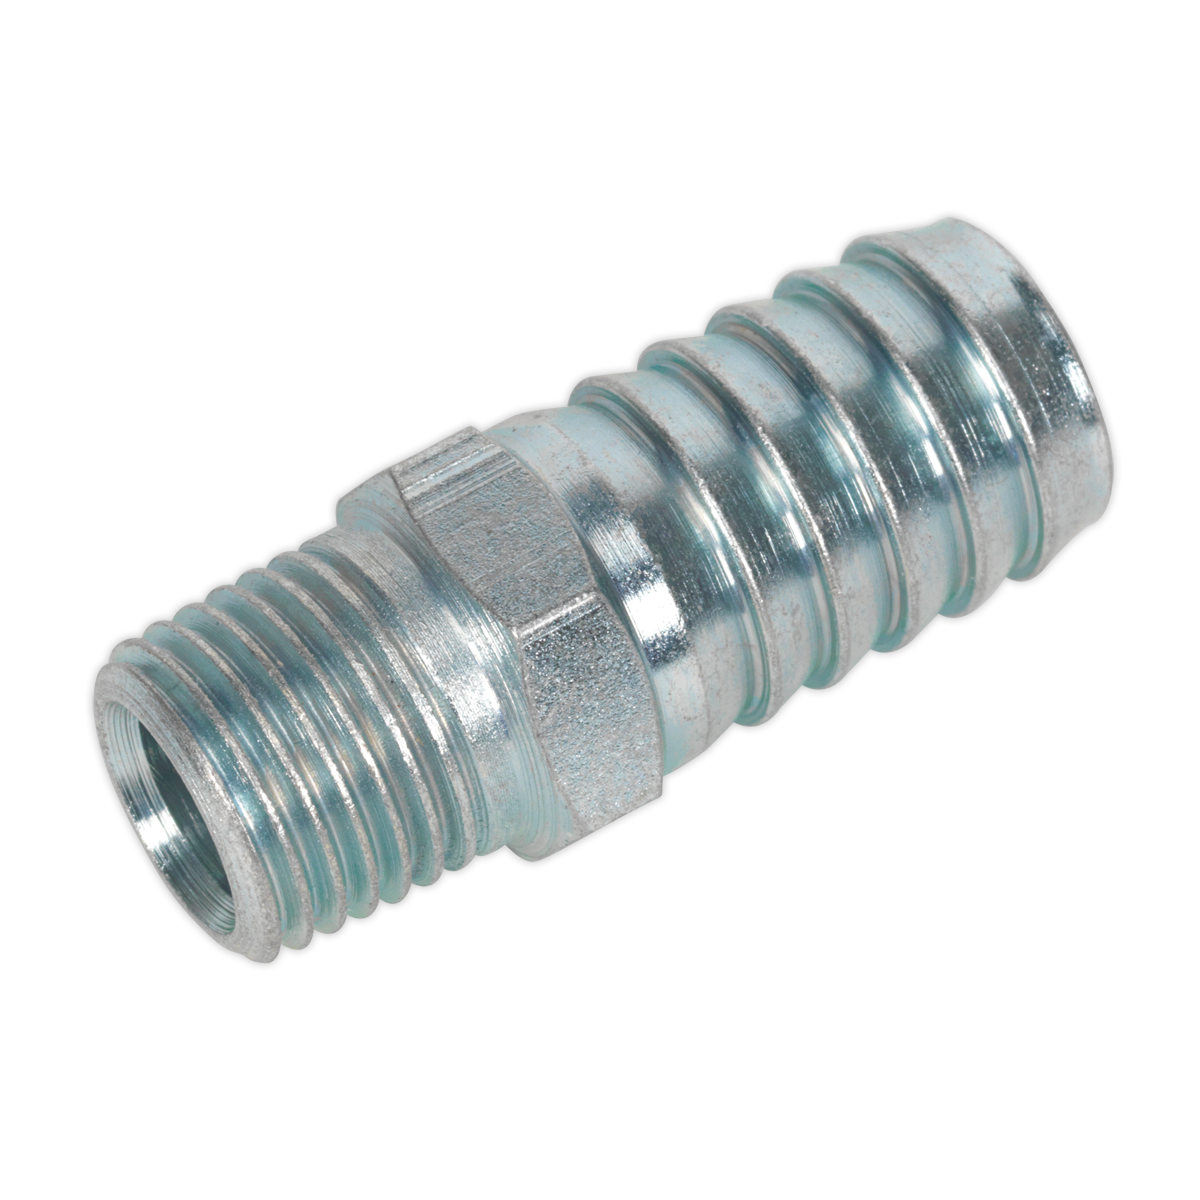 Screwed Tailpiece Male 1/4"BSPT - 1/2" Hose Pack of 5 - AC40 - Farming Parts